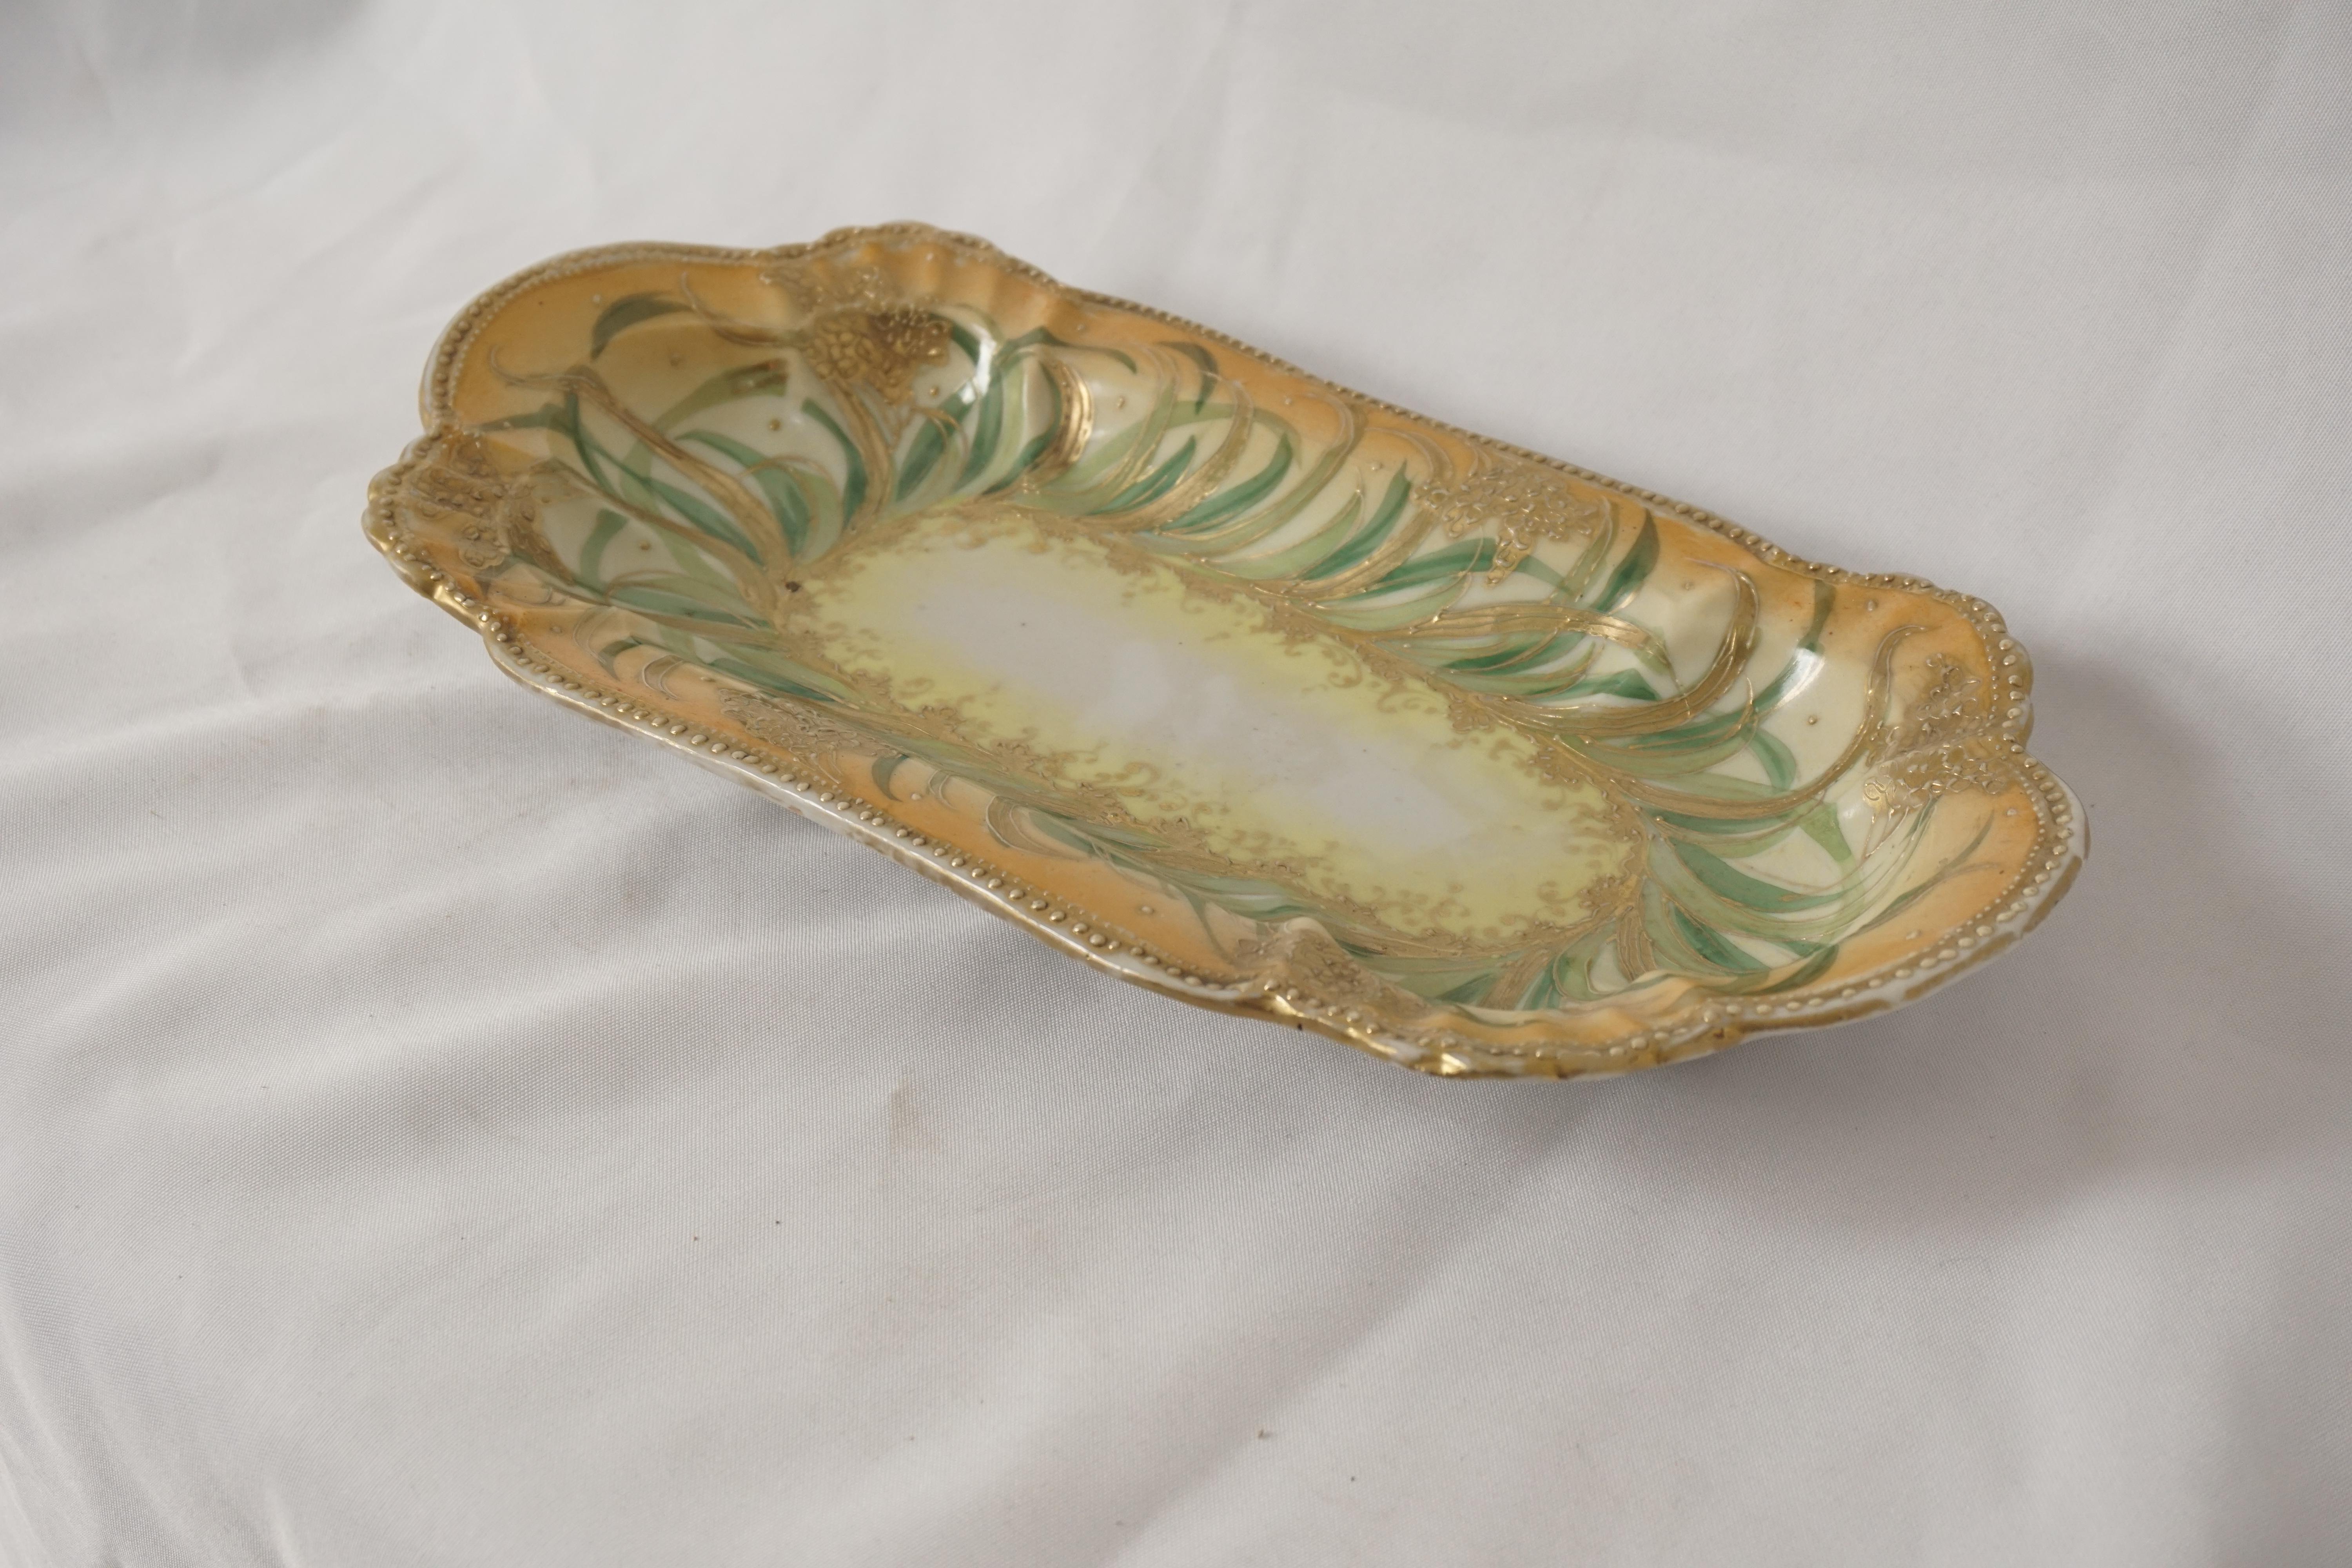 Vintage hand painted dish, rectangular dish with gold leaf, Japan 1910, B49

Japan 1910
Rectangular shape
With hand painted leaves, gold leaf flowers and gold leaf trim
In very good condition
No chips or cracks

B49

Measures: 13